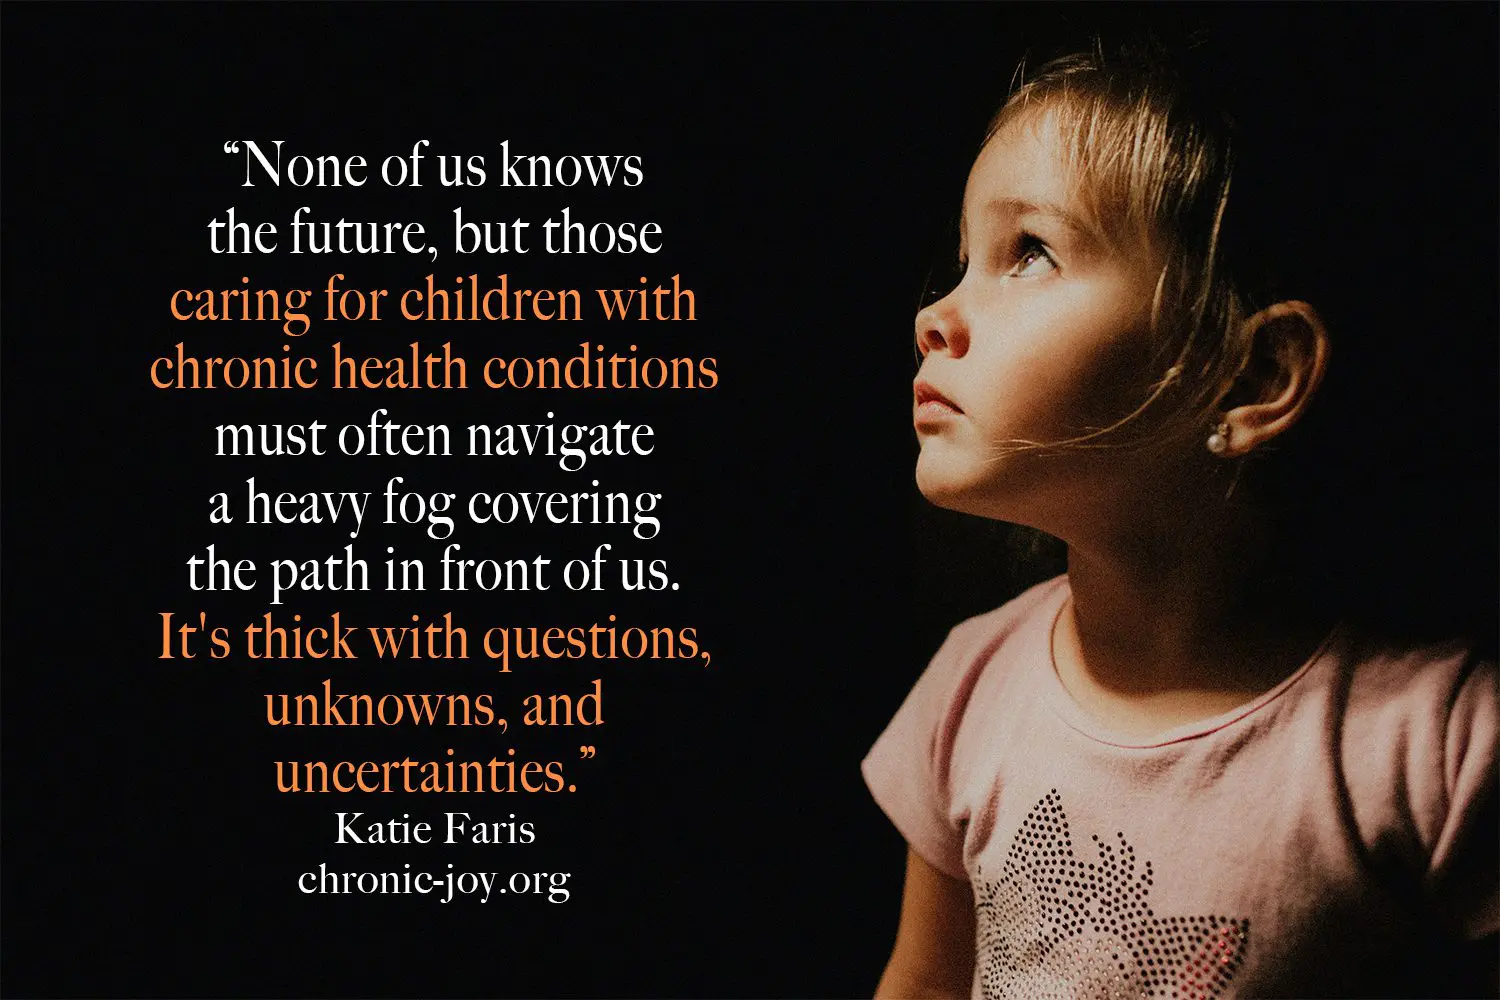 “None of us knows the future, but those caring for children with chronic health conditions must often navigate a heavy fog covering the path in front of us. It's thick with questions, unknowns, and uncertainties.” Katie Faris